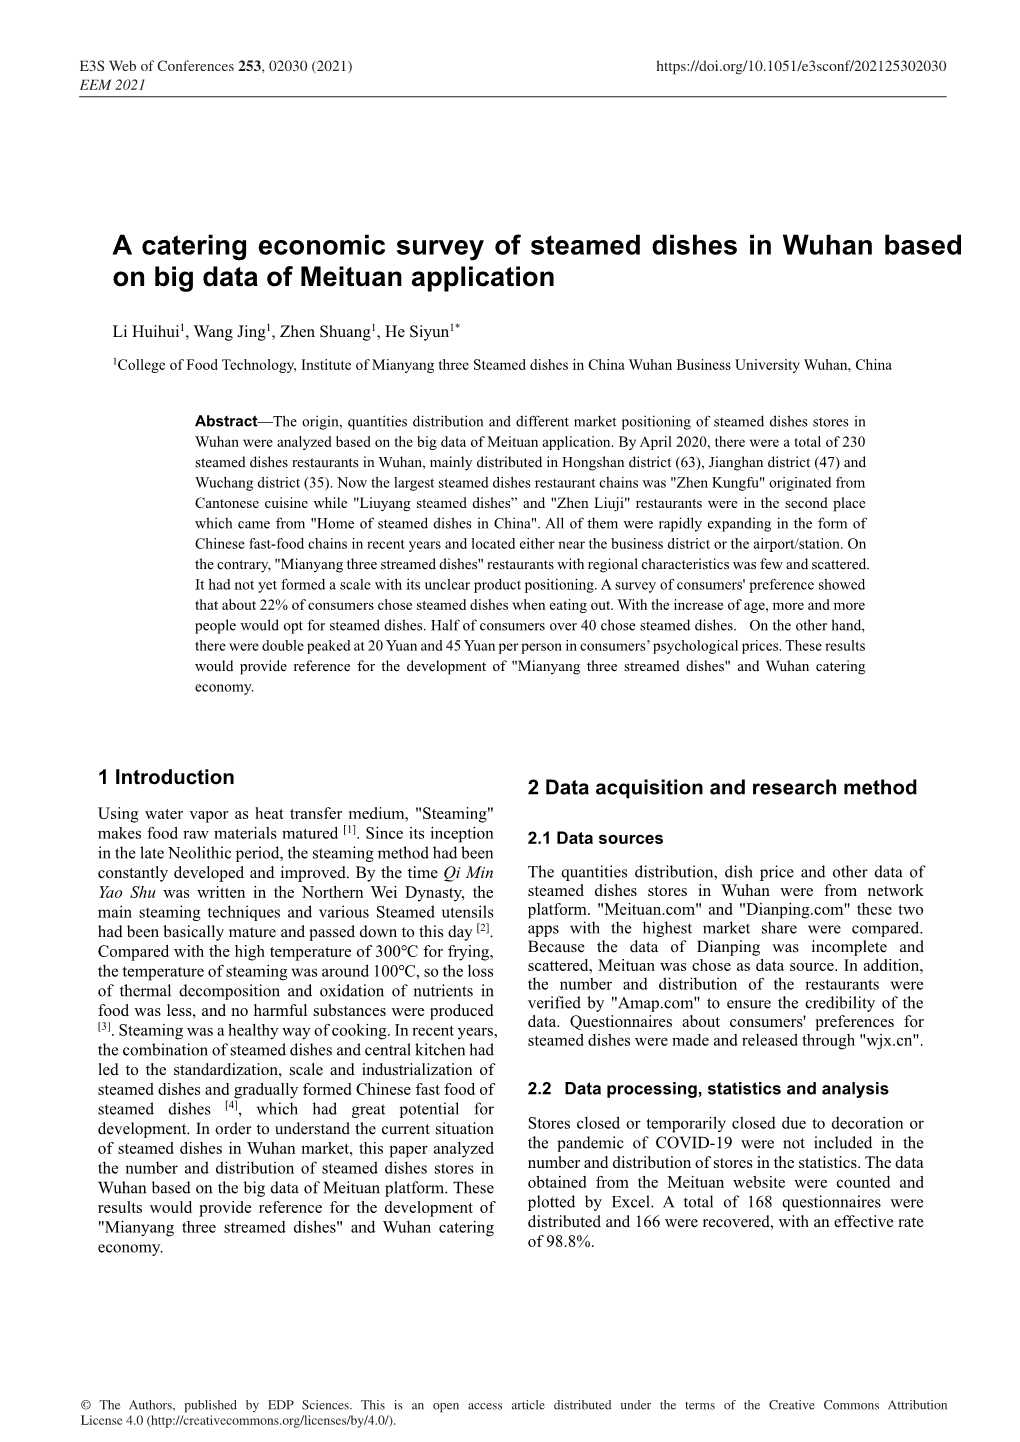 A Catering Economic Survey of Steamed Dishes in Wuhan Based on Big Data of Meituan Application